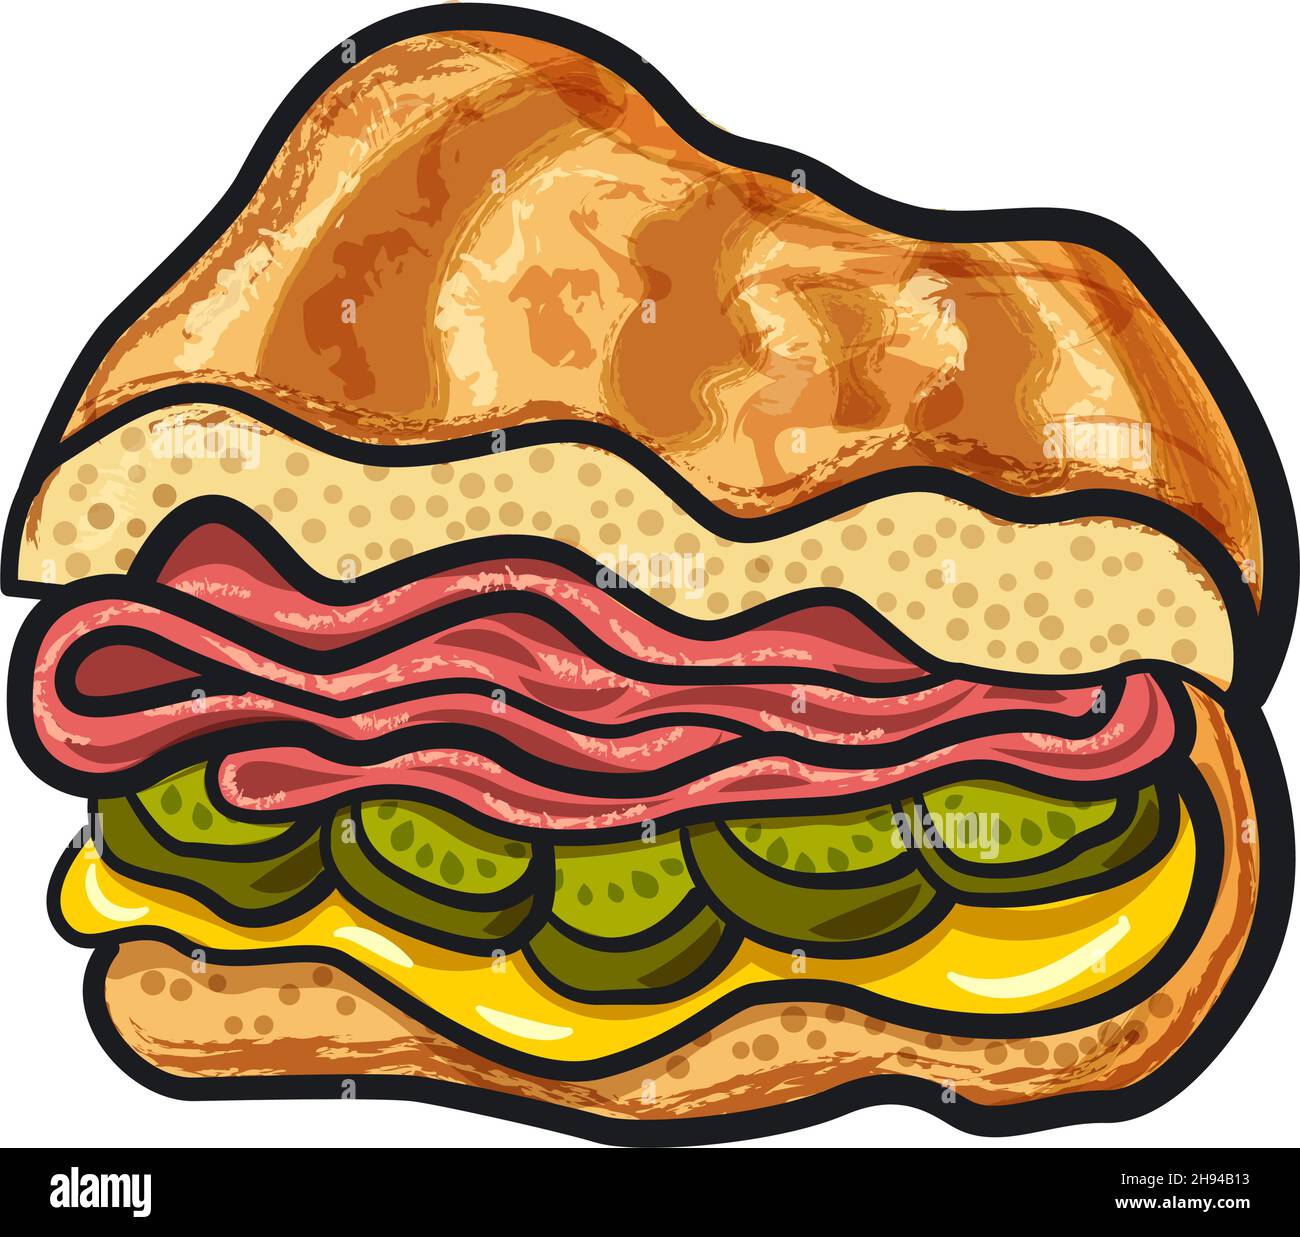 Illustration of the cuban sandwich with ham, cheese and cucumbers Stock Vector